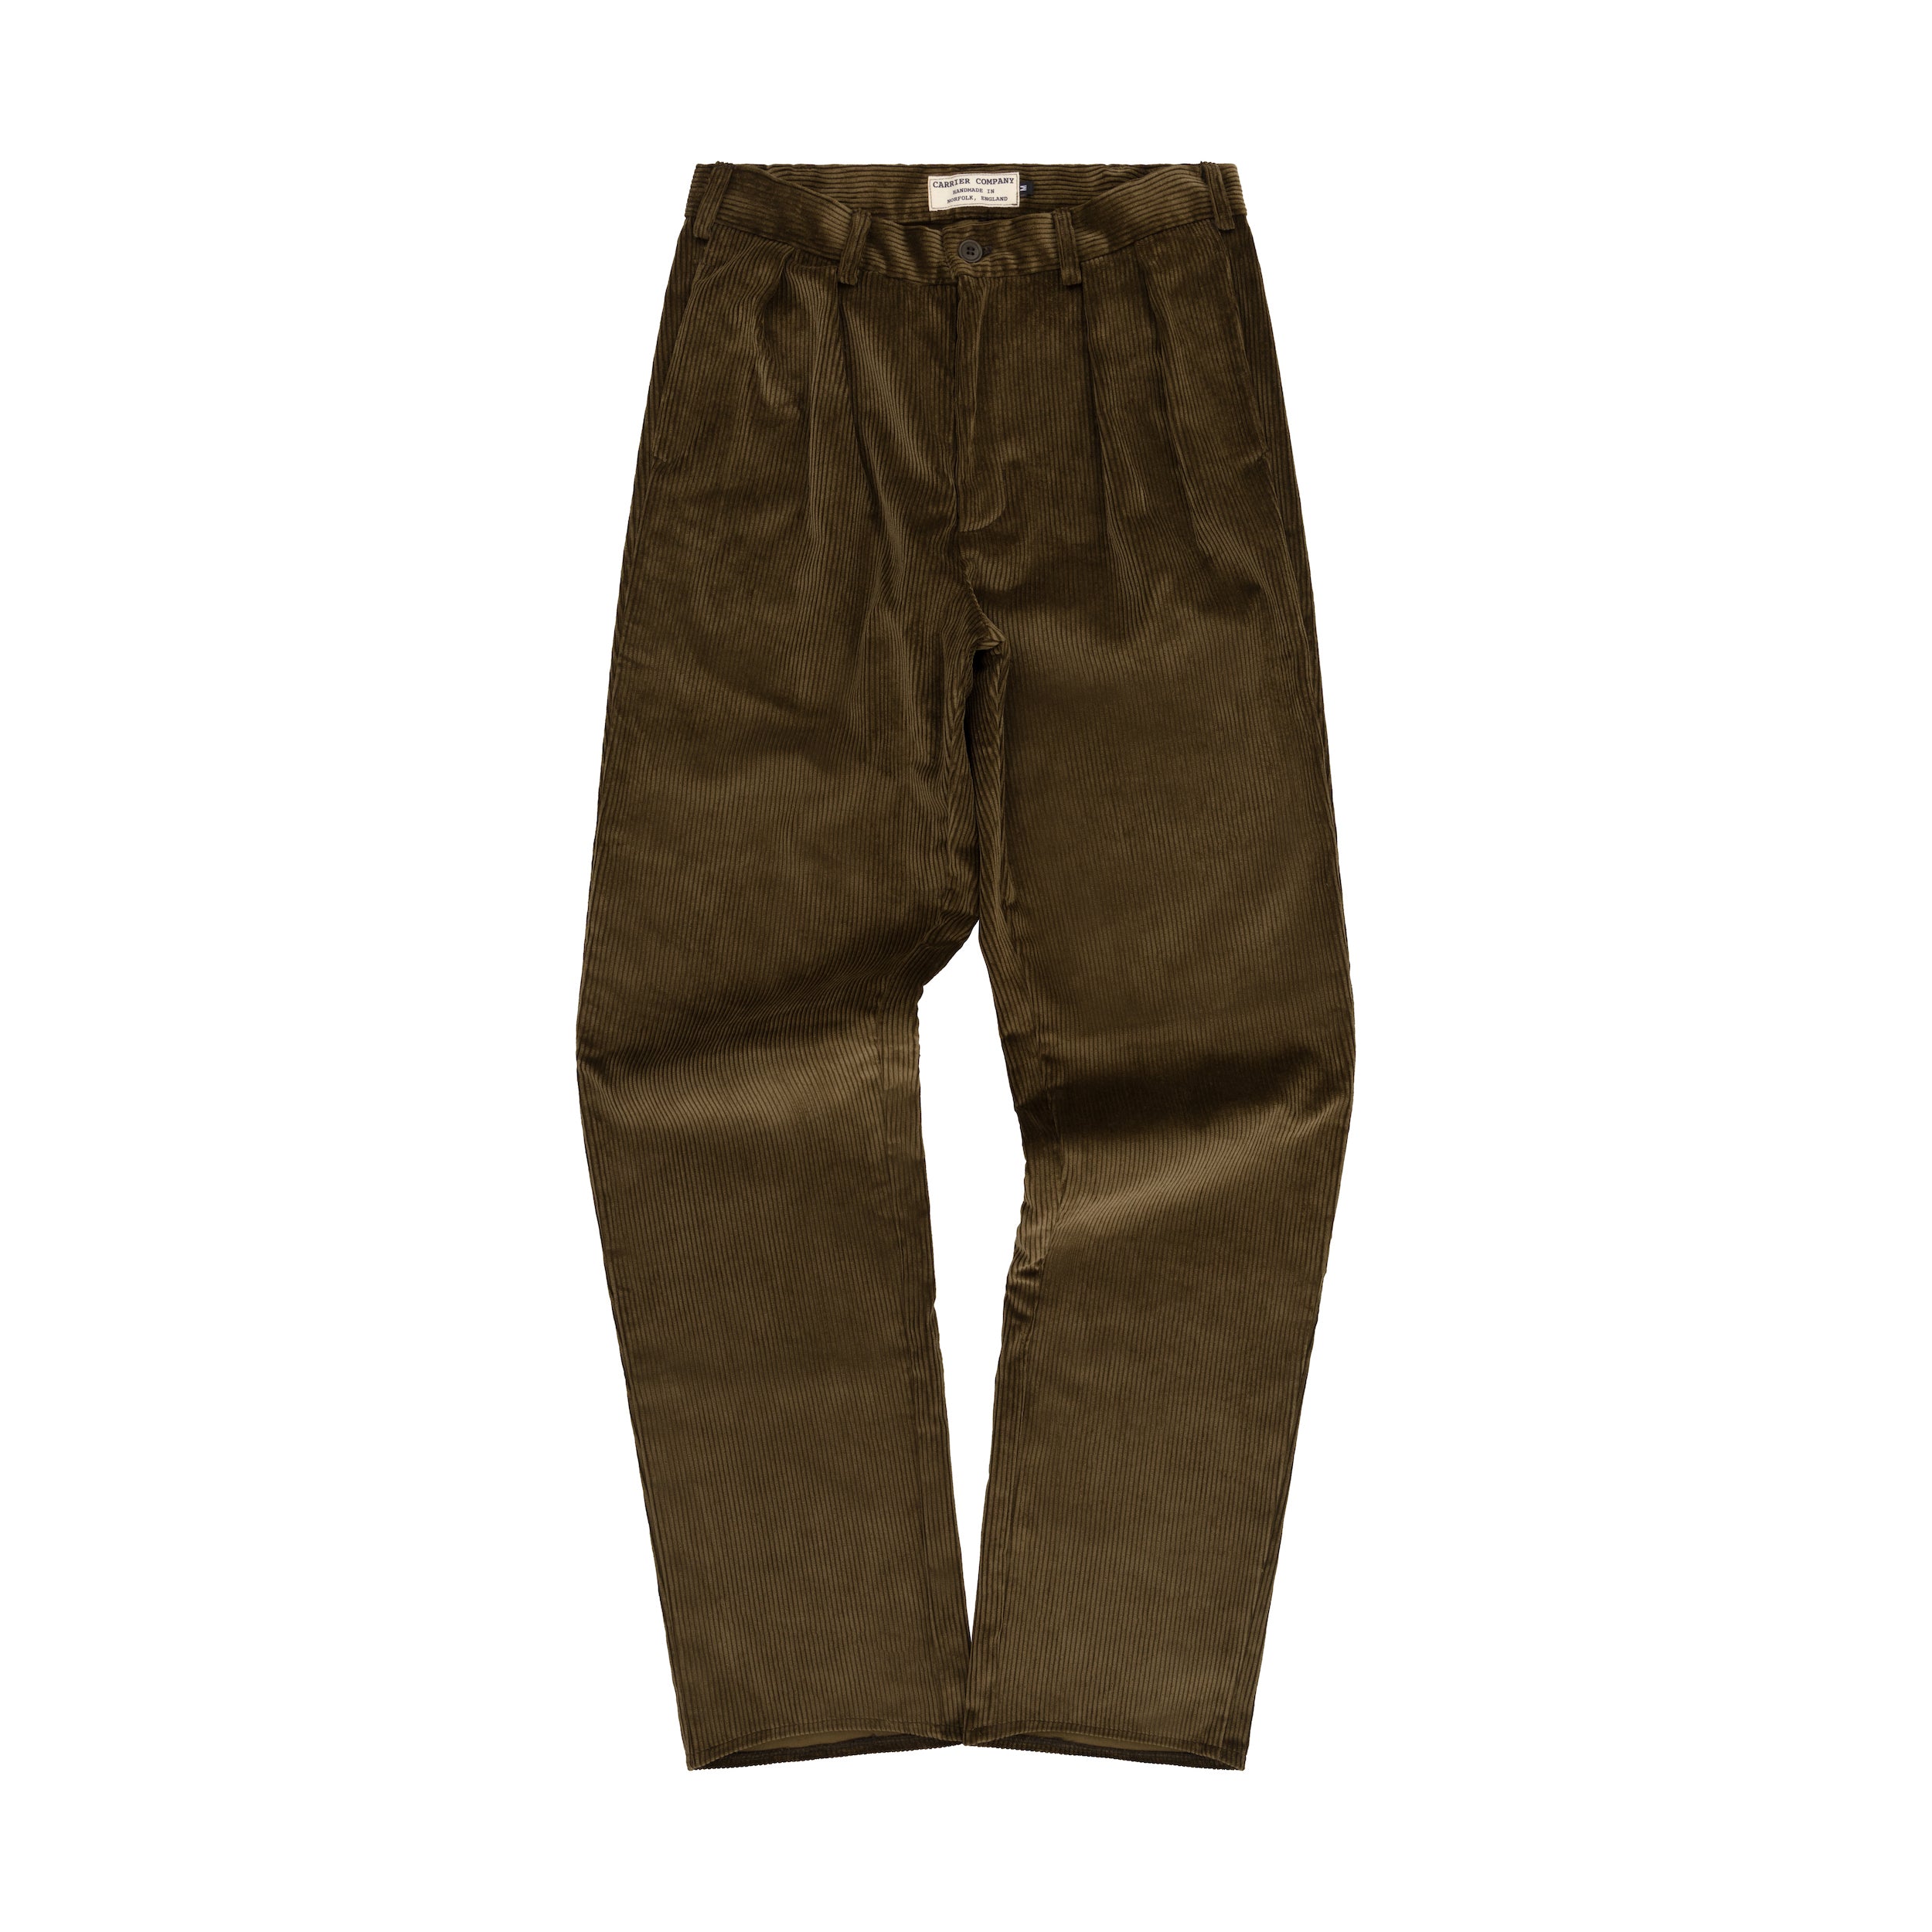 Time is on CLASSIC CORDUROY TROUSER - スラックス